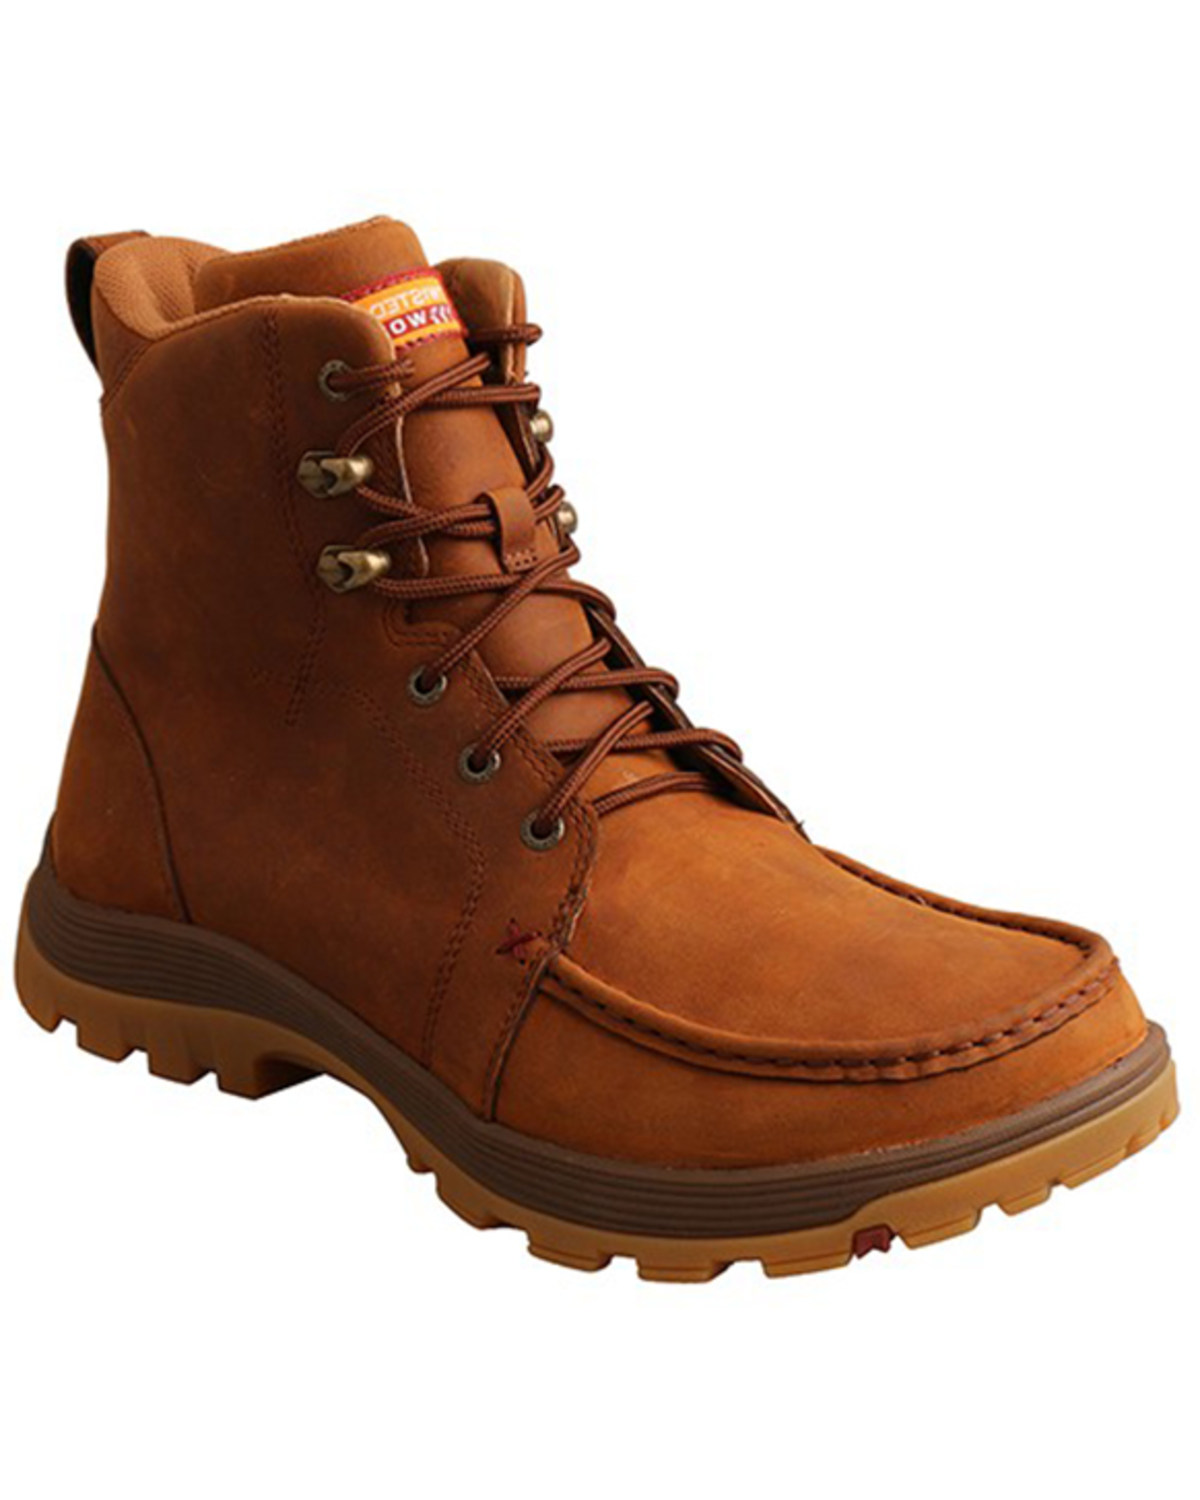 Twisted X Men's 6" Lace-Up Work Boots - Soft Toe